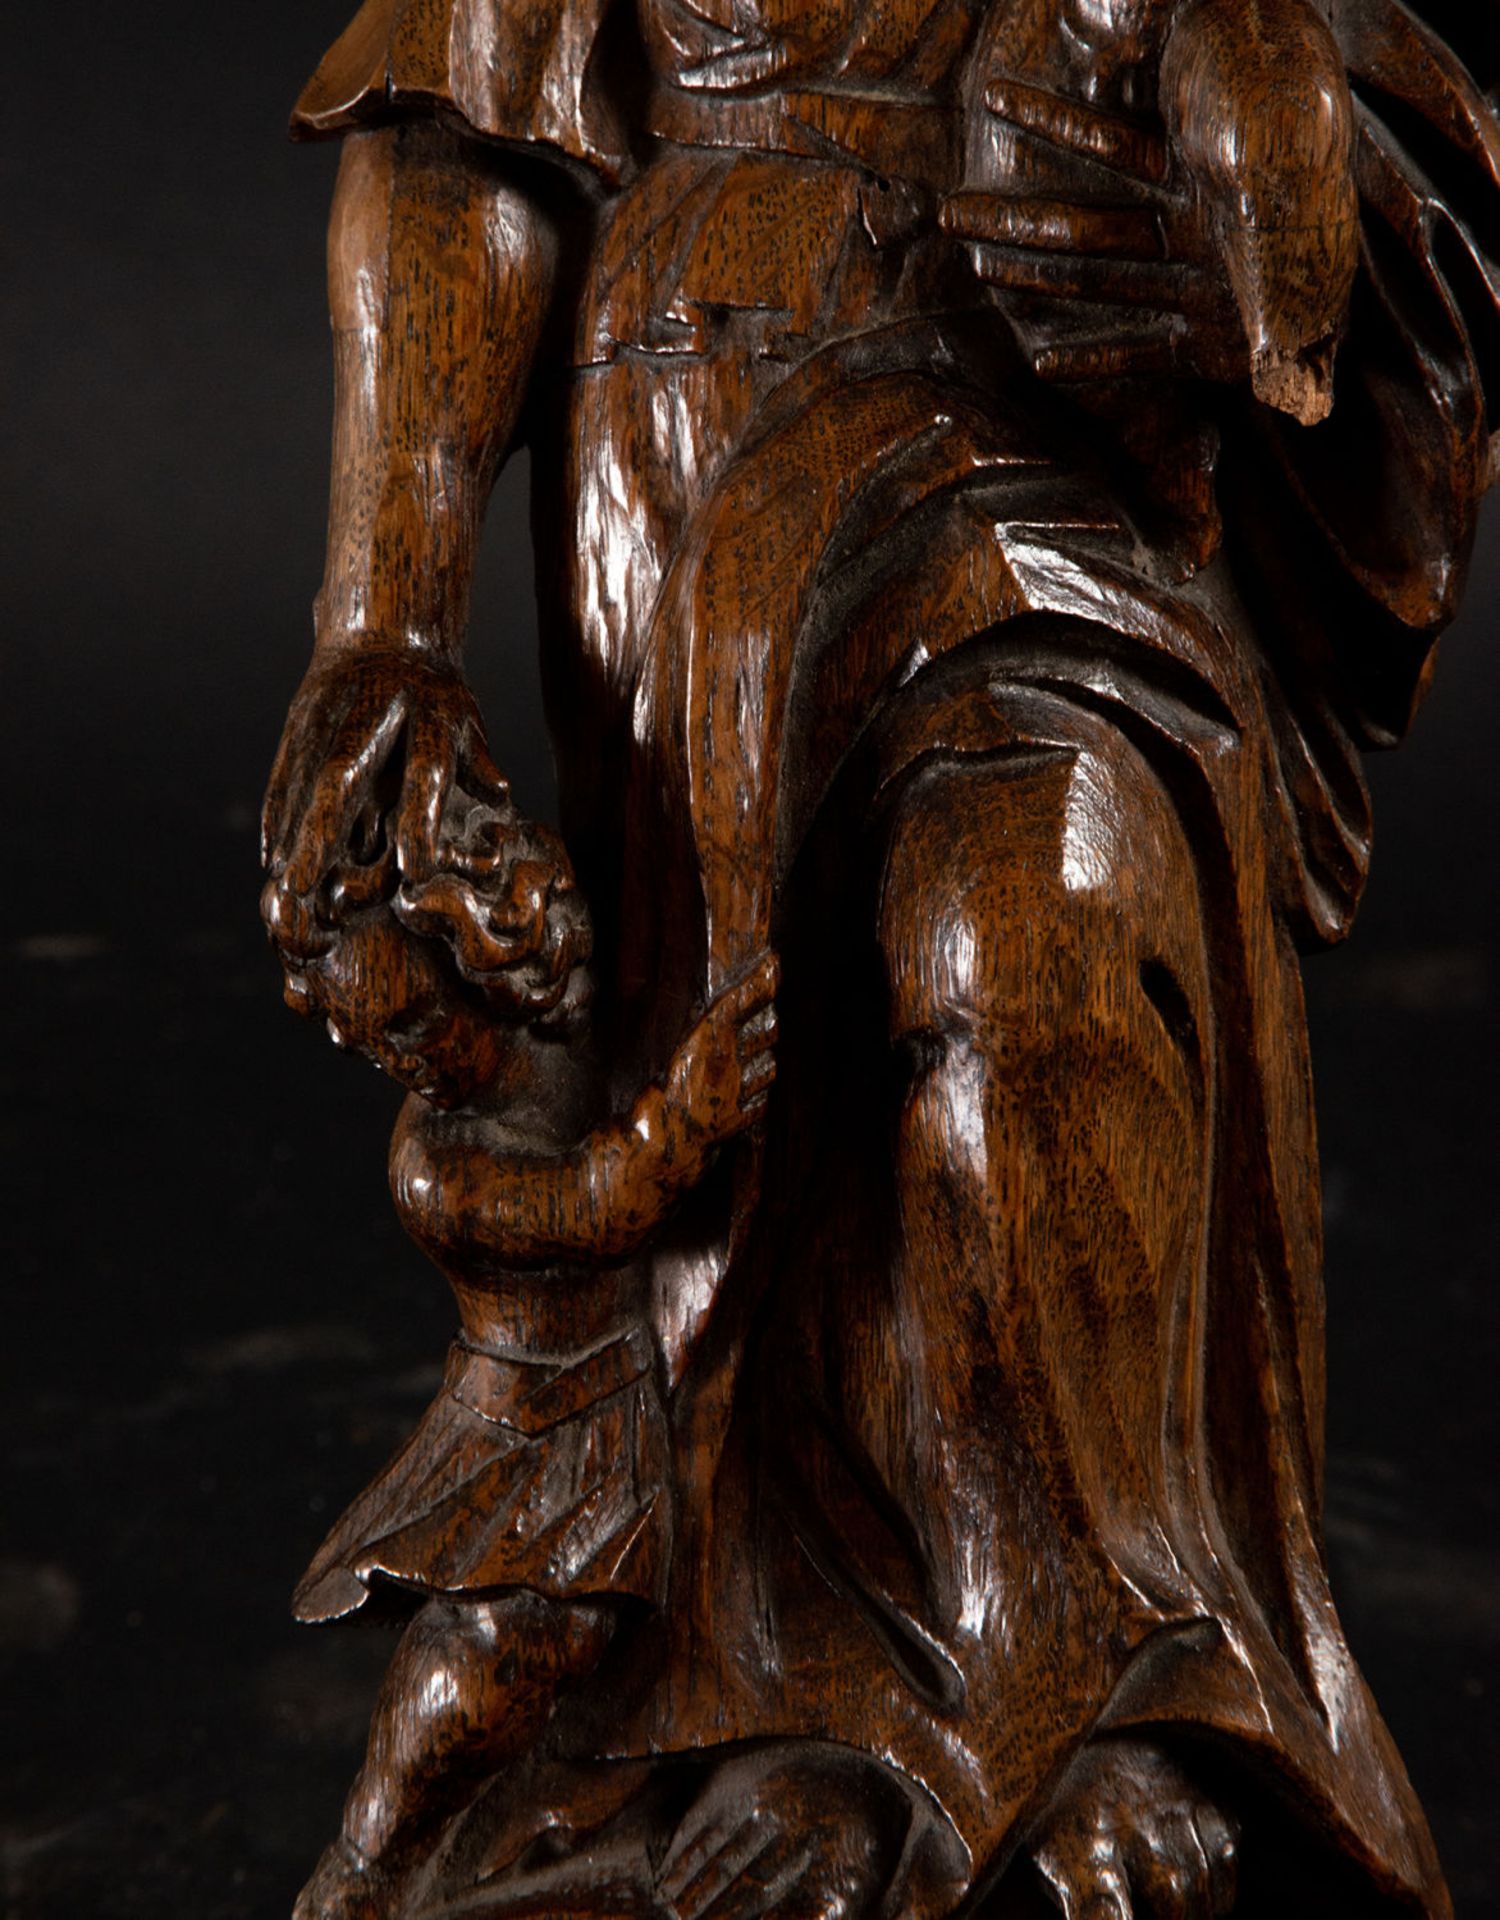 Important German Baroque Madonna and Child in Oak wood, Cologne, 16th - 17th centuries - Image 4 of 5